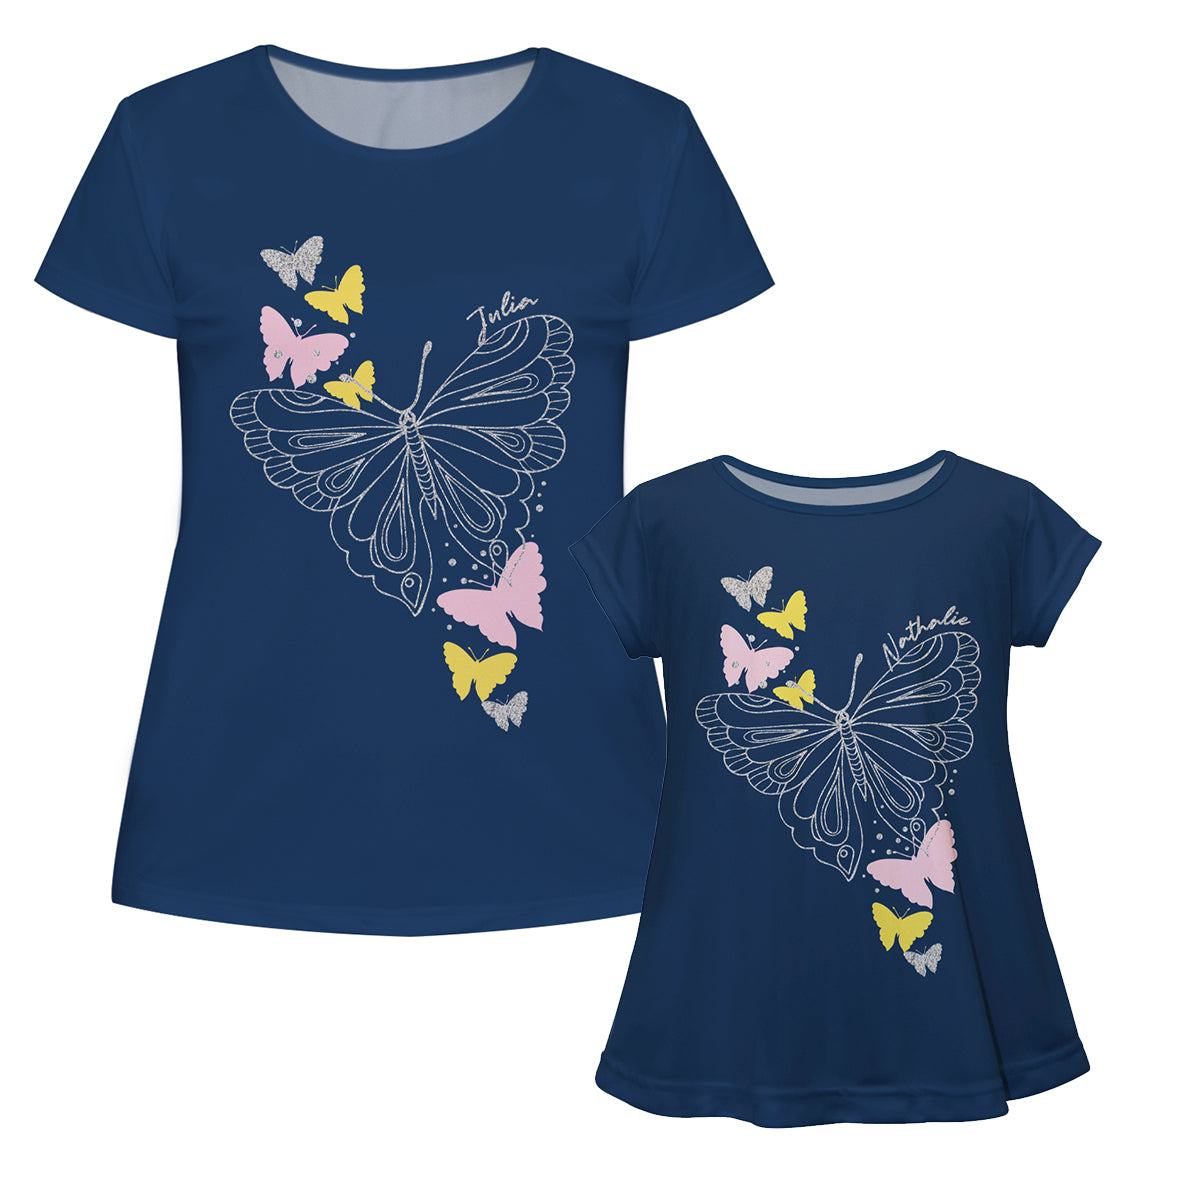 Butterfly Navy and White Short Sleeve Tee Shirt - Wimziy&Co.